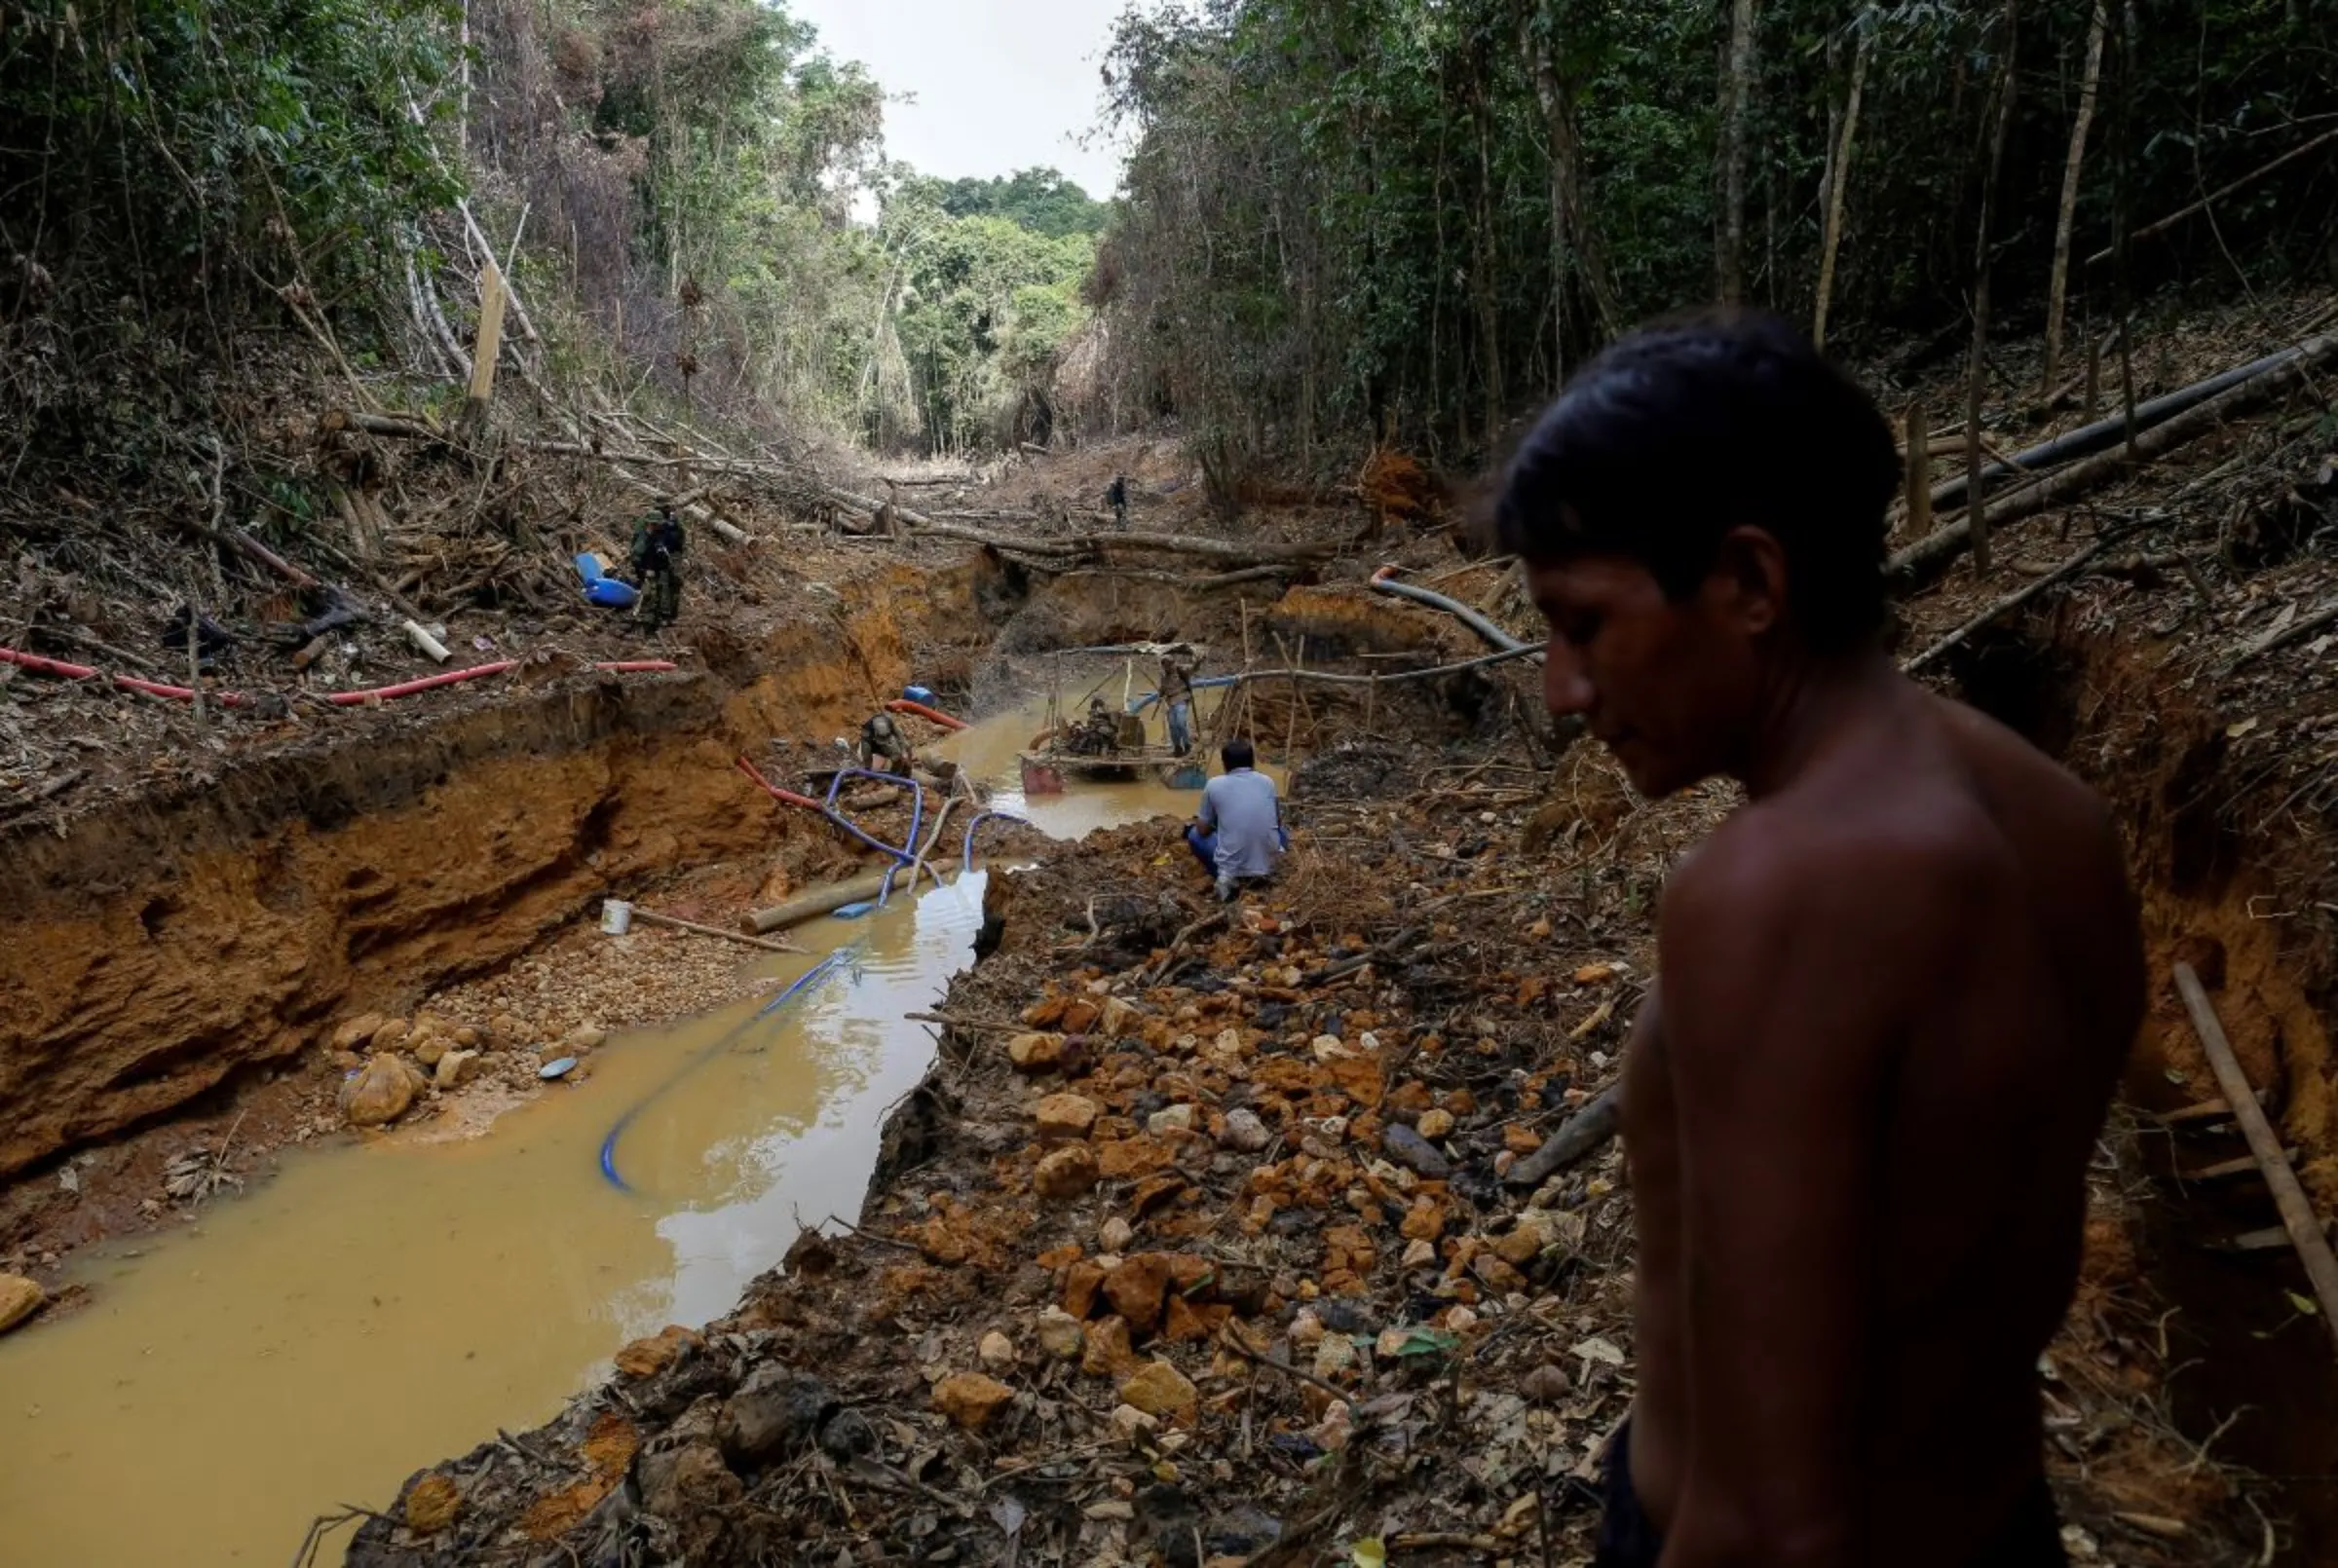 A Yanomami indian follows agents of Brazil's environmental agency in a gold mine during an operation against illegal gold mining on indigenous land, in the heart of the Amazon rainforest, in Roraima state, Brazil April 17, 2016. REUTERS/Bruno Kelly